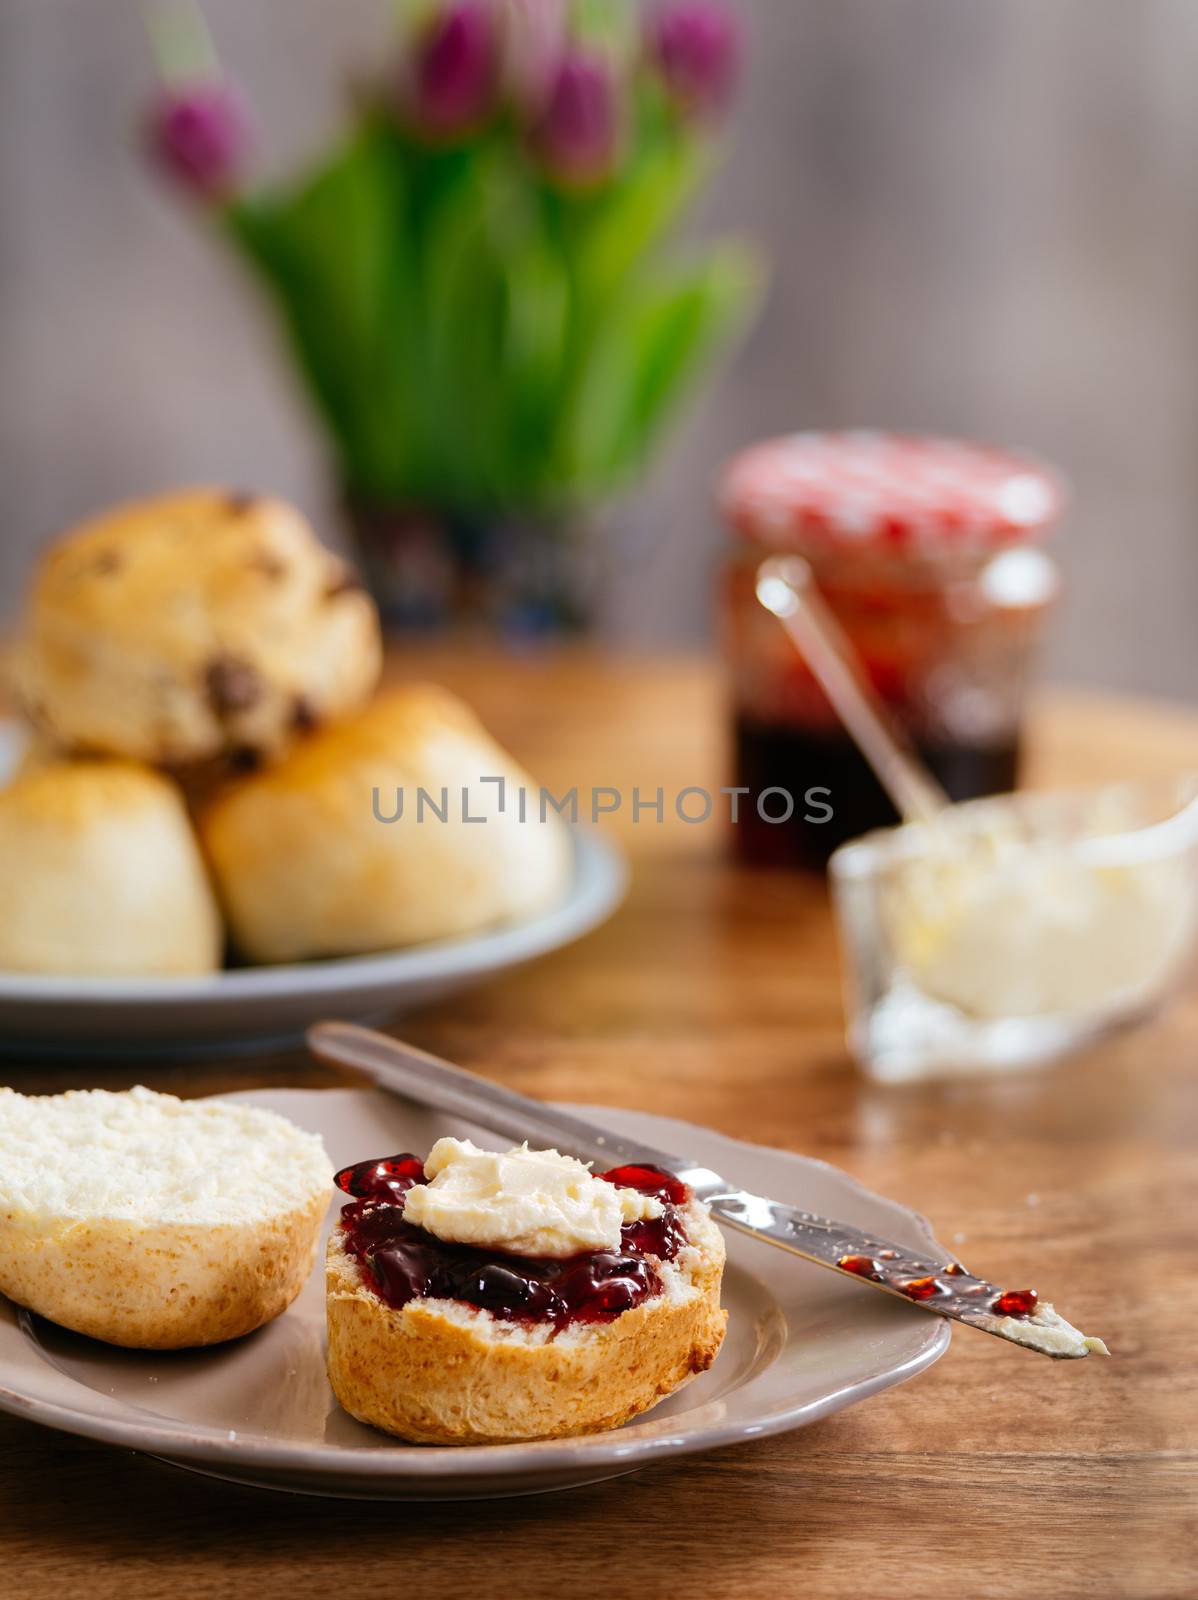 Photo of delicious scones on a plate with clotted cream and jam.
